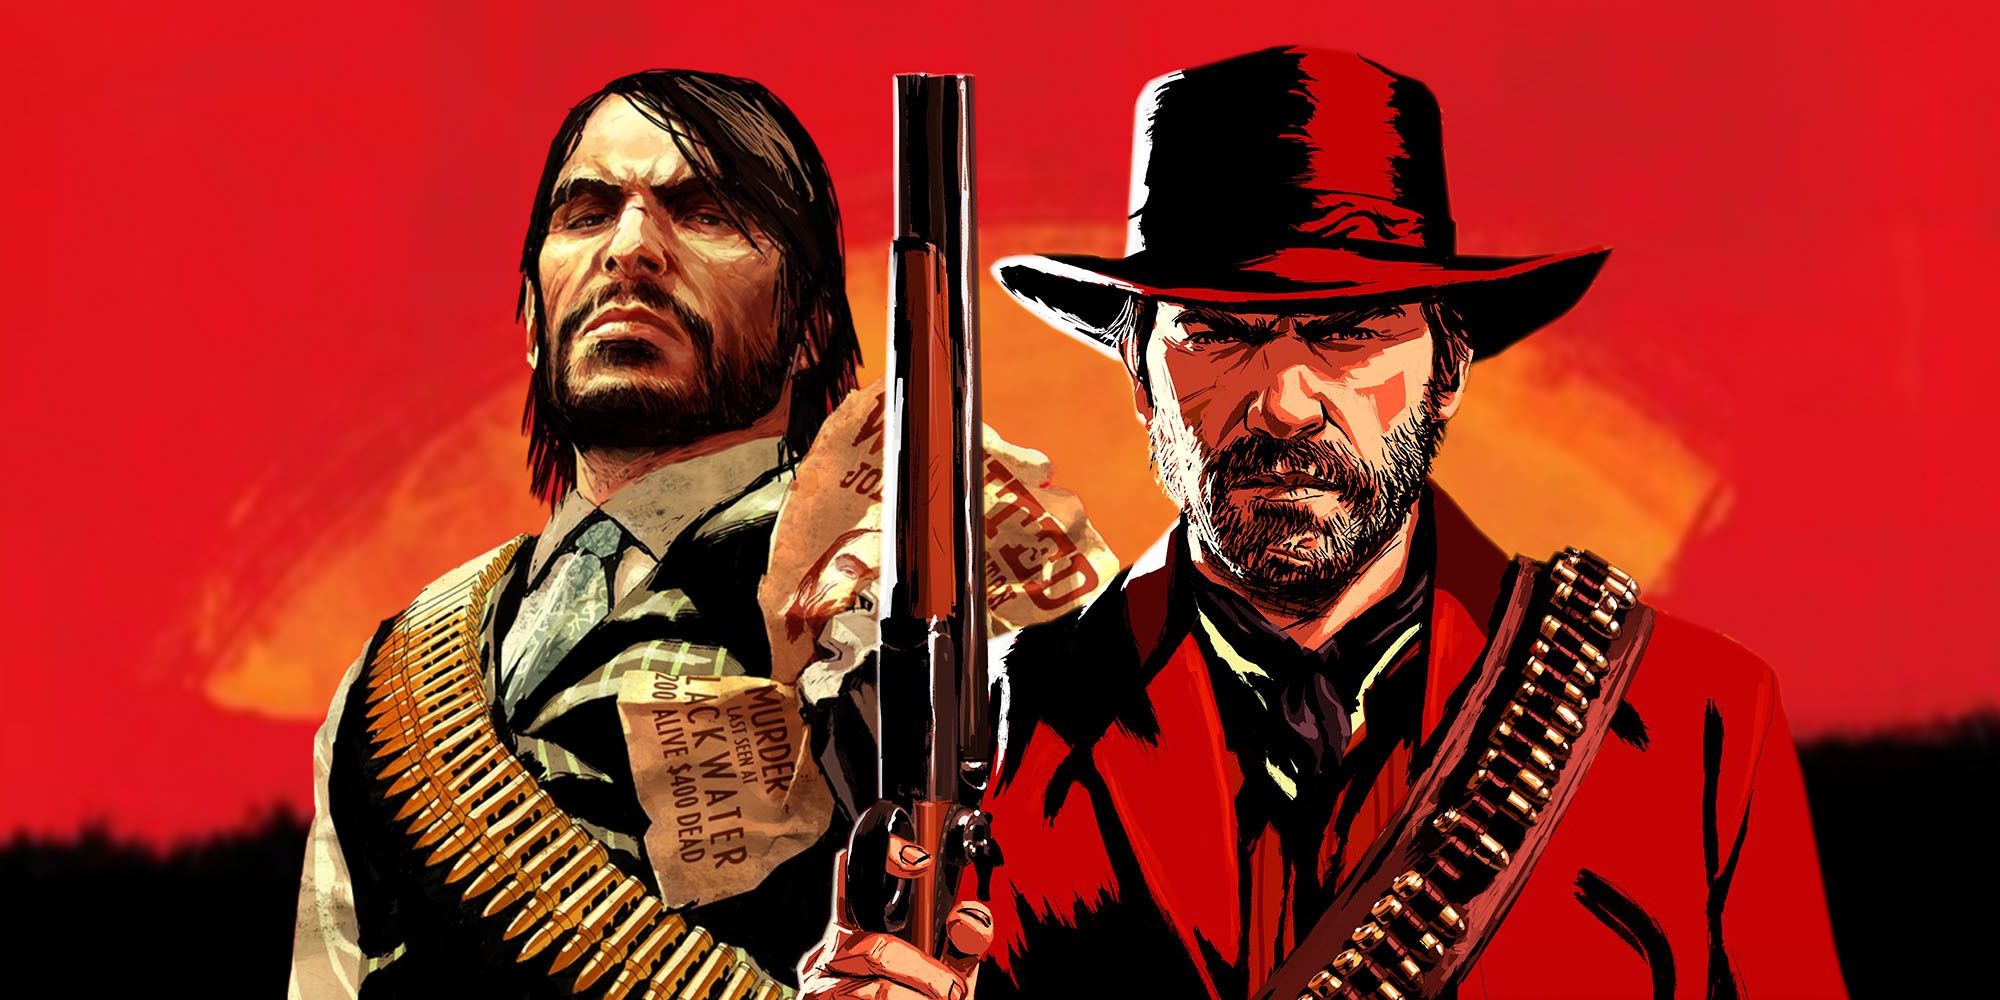 Rockstar Writing Lead Seems To Have Left After 16 Years